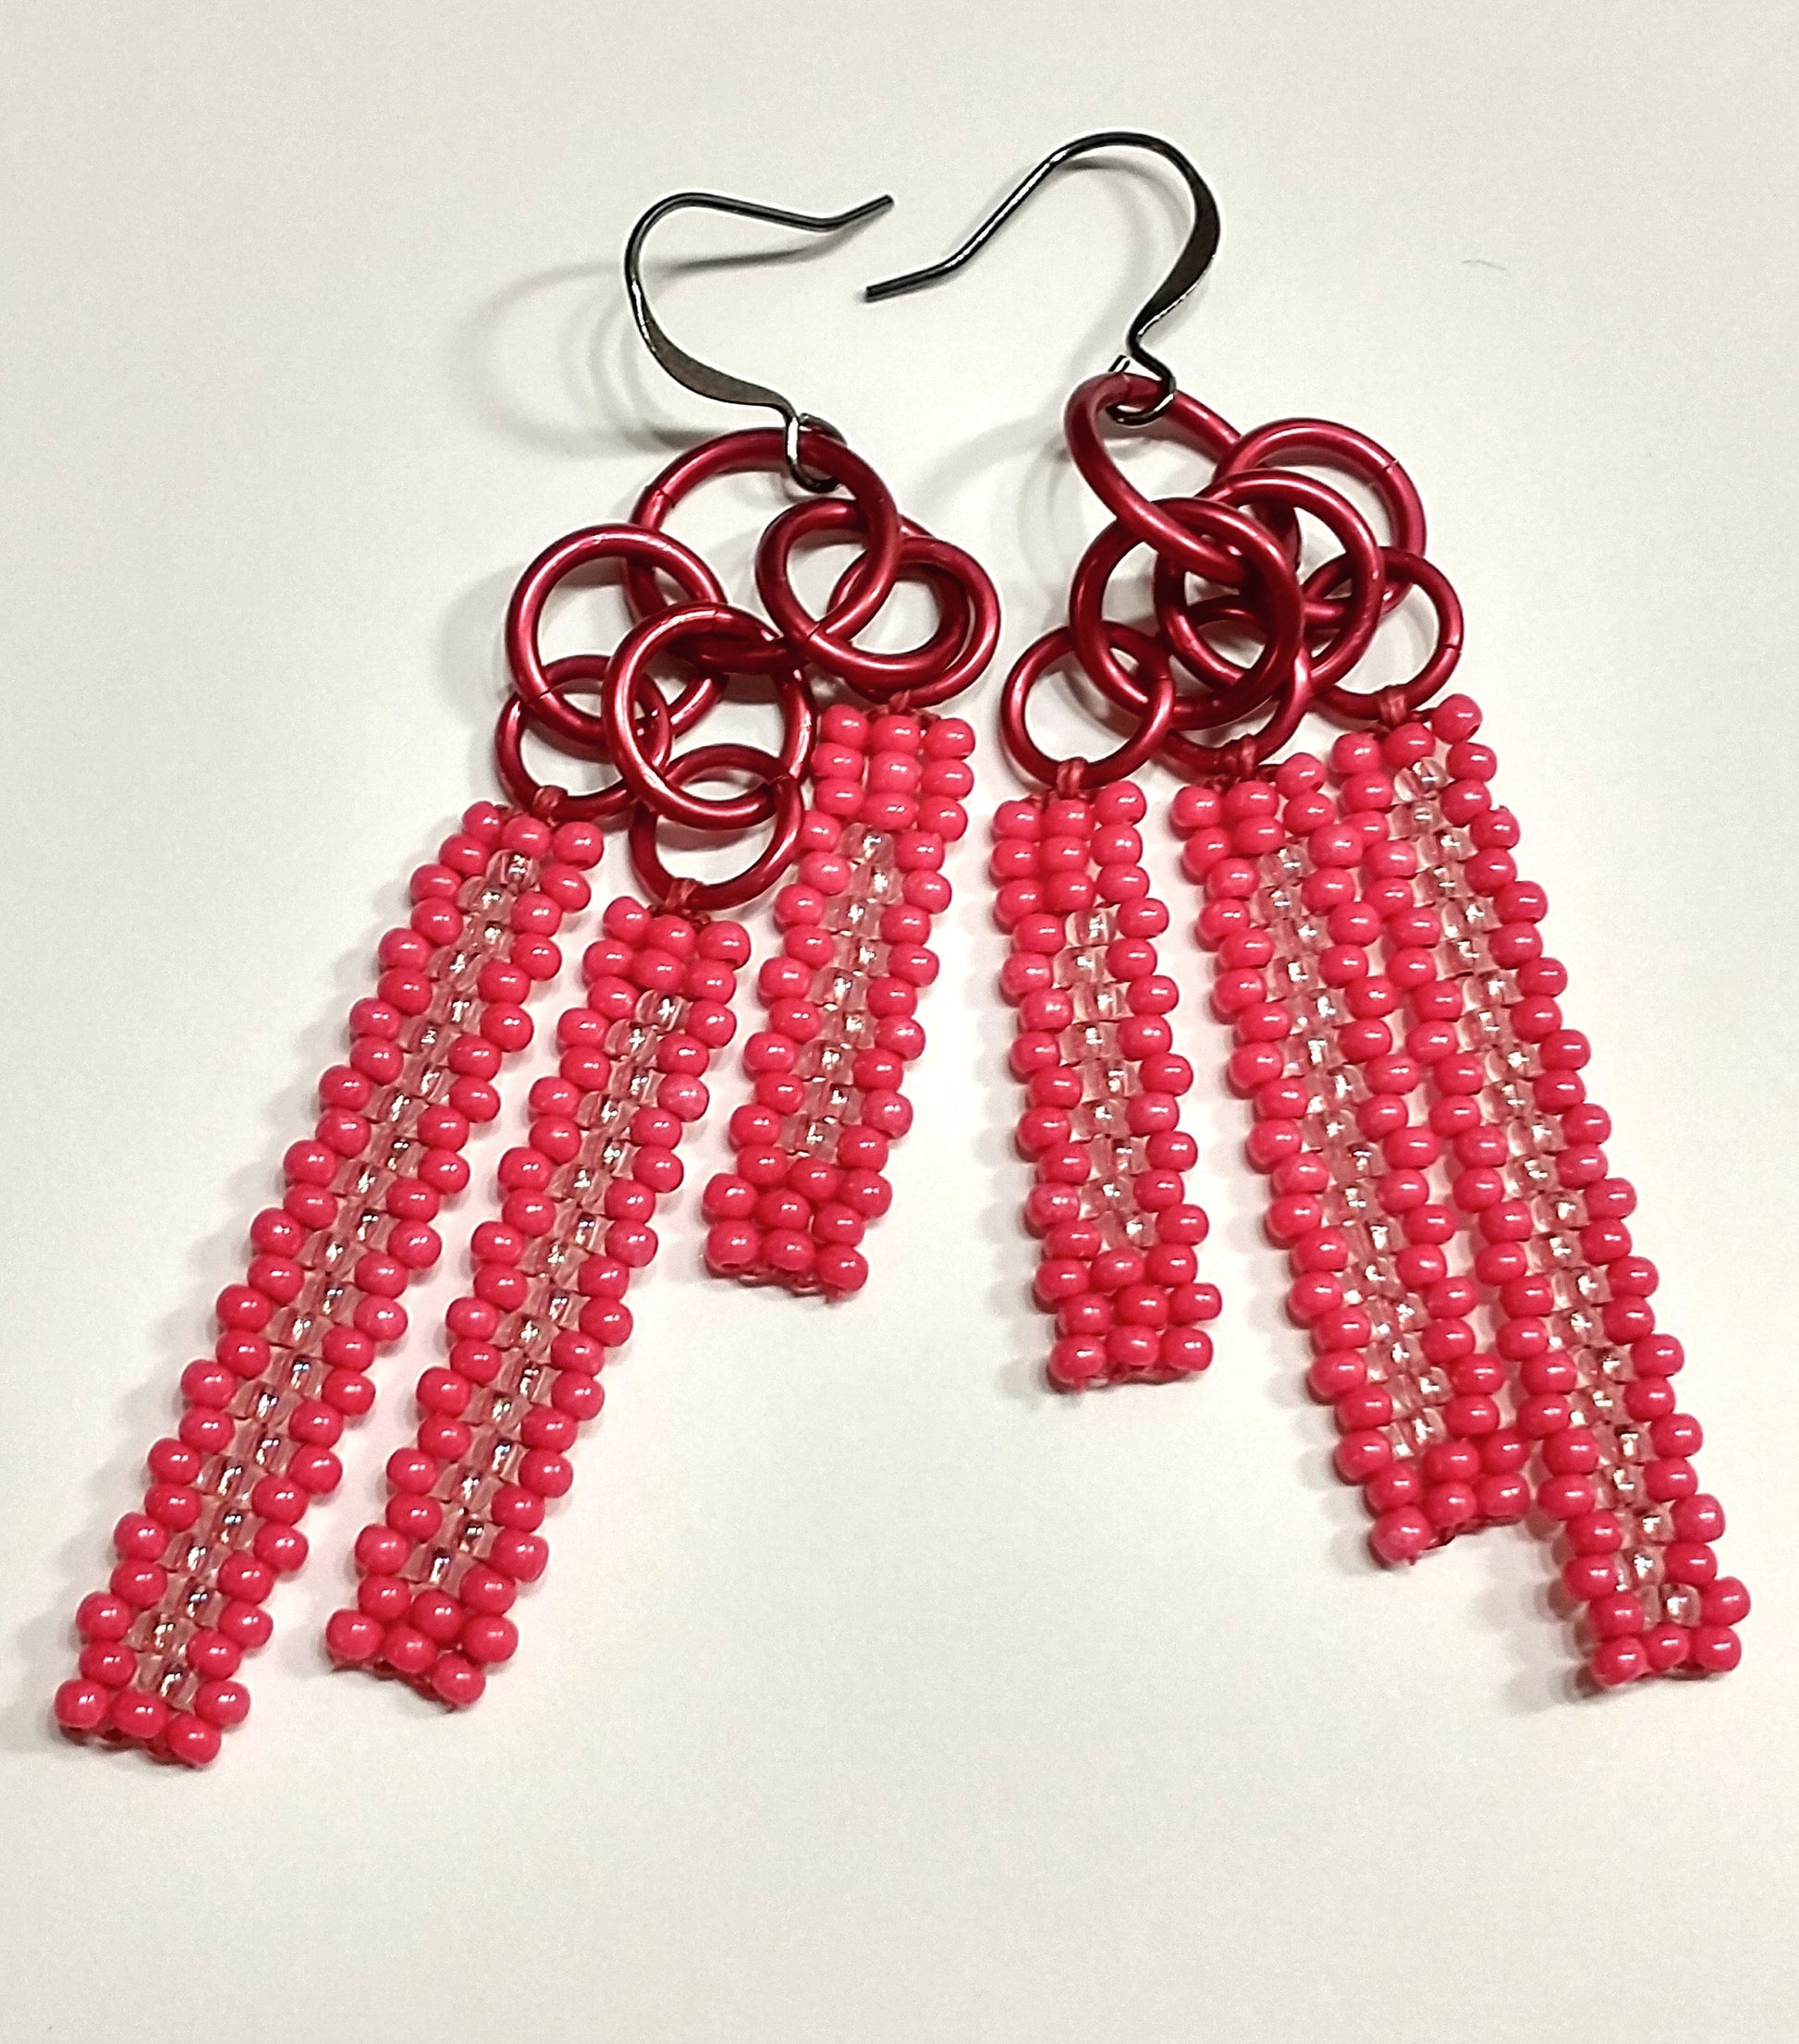 Tiered Red Beaded Earrings | Seed Bead Geometric Fringe | Colorful Woven Dangles | Handwoven Native Beadwork | Chic Bohemian Jewelry |